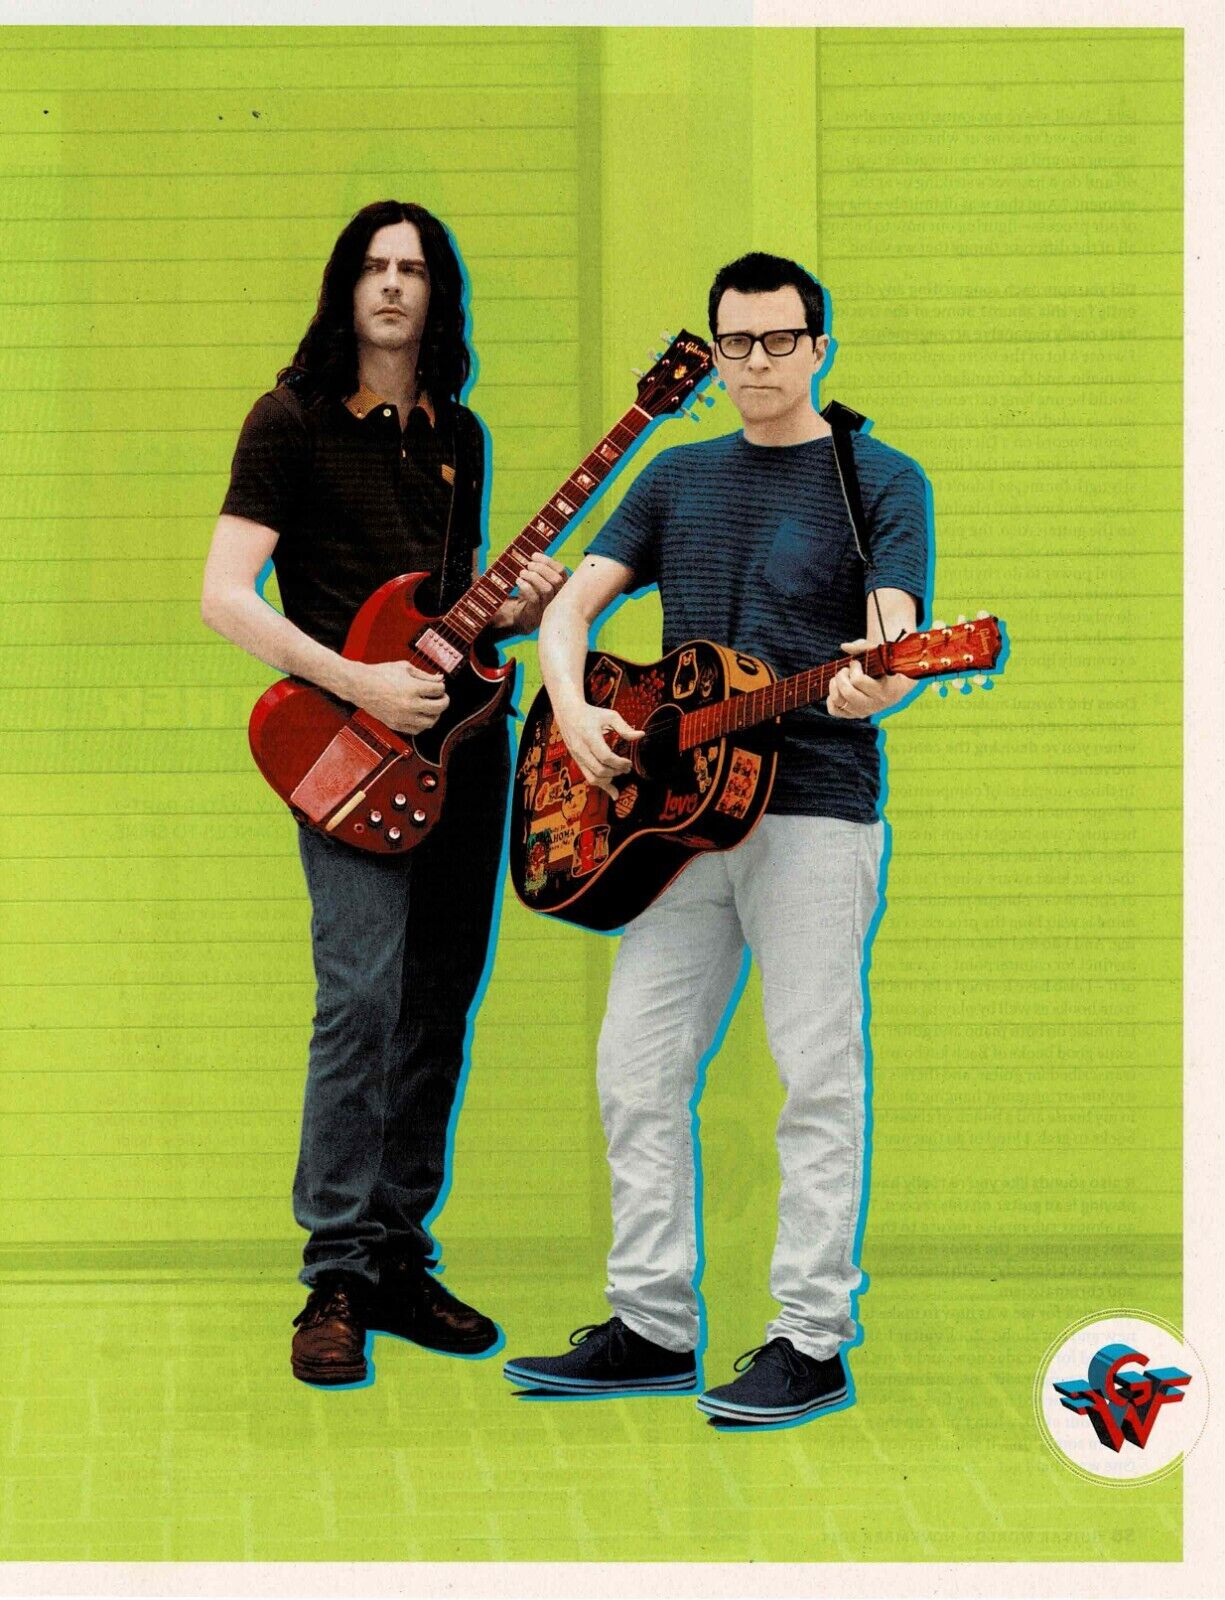 Brian Bell & Rivers Cuomo of Weezer - Music Print Ad Photo - 2014